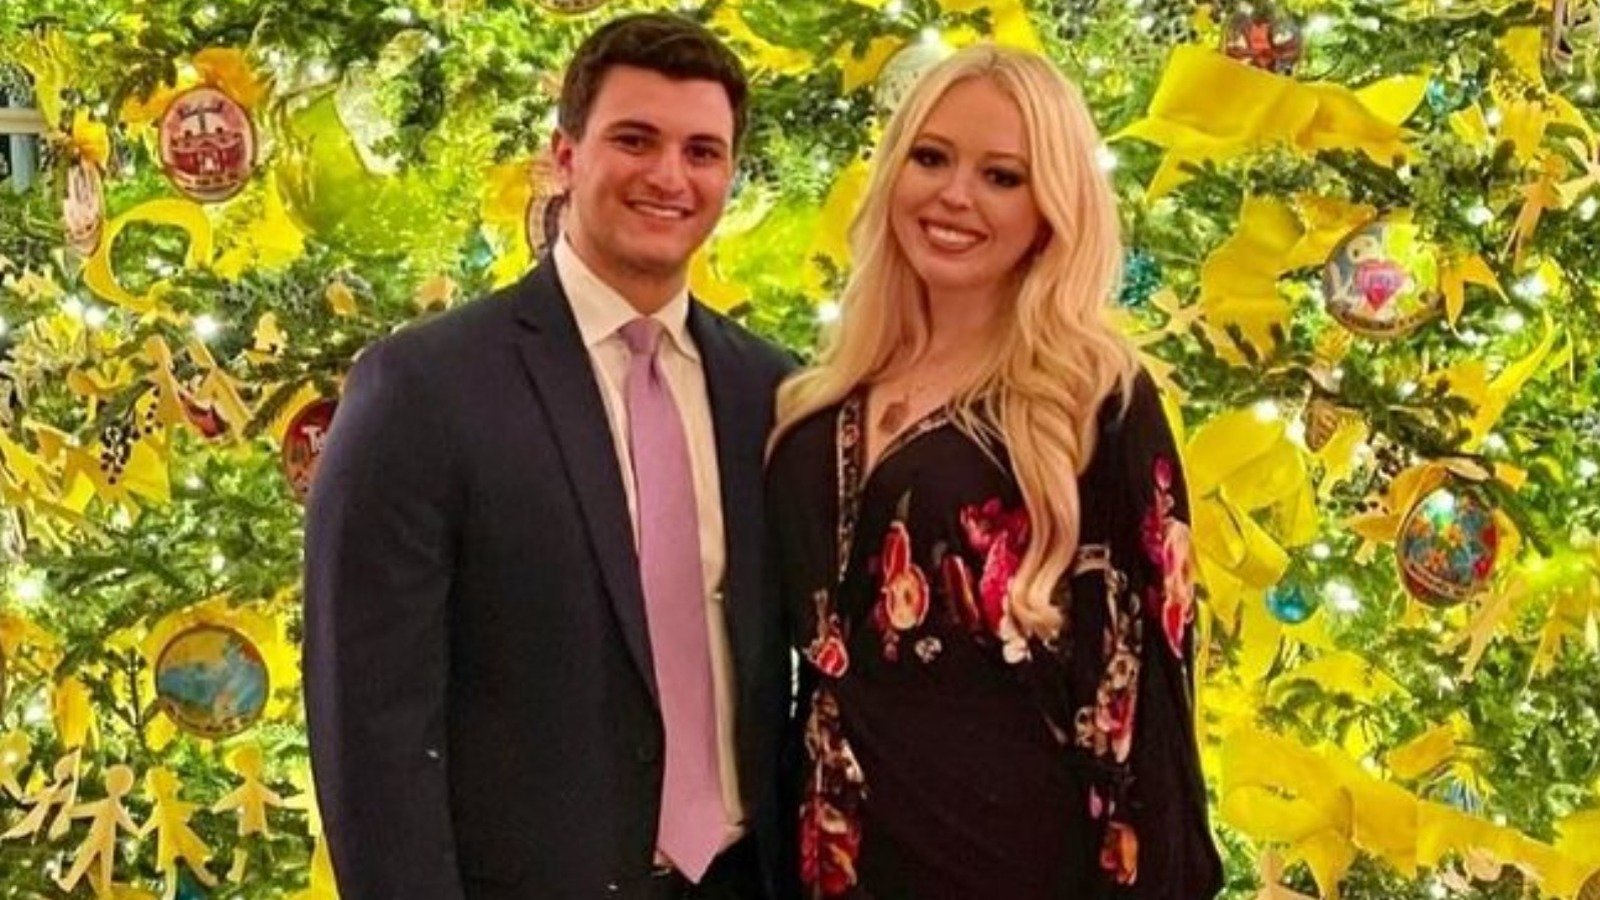 The Truth About Tiffany Trump And Michael Boulos' Relationship